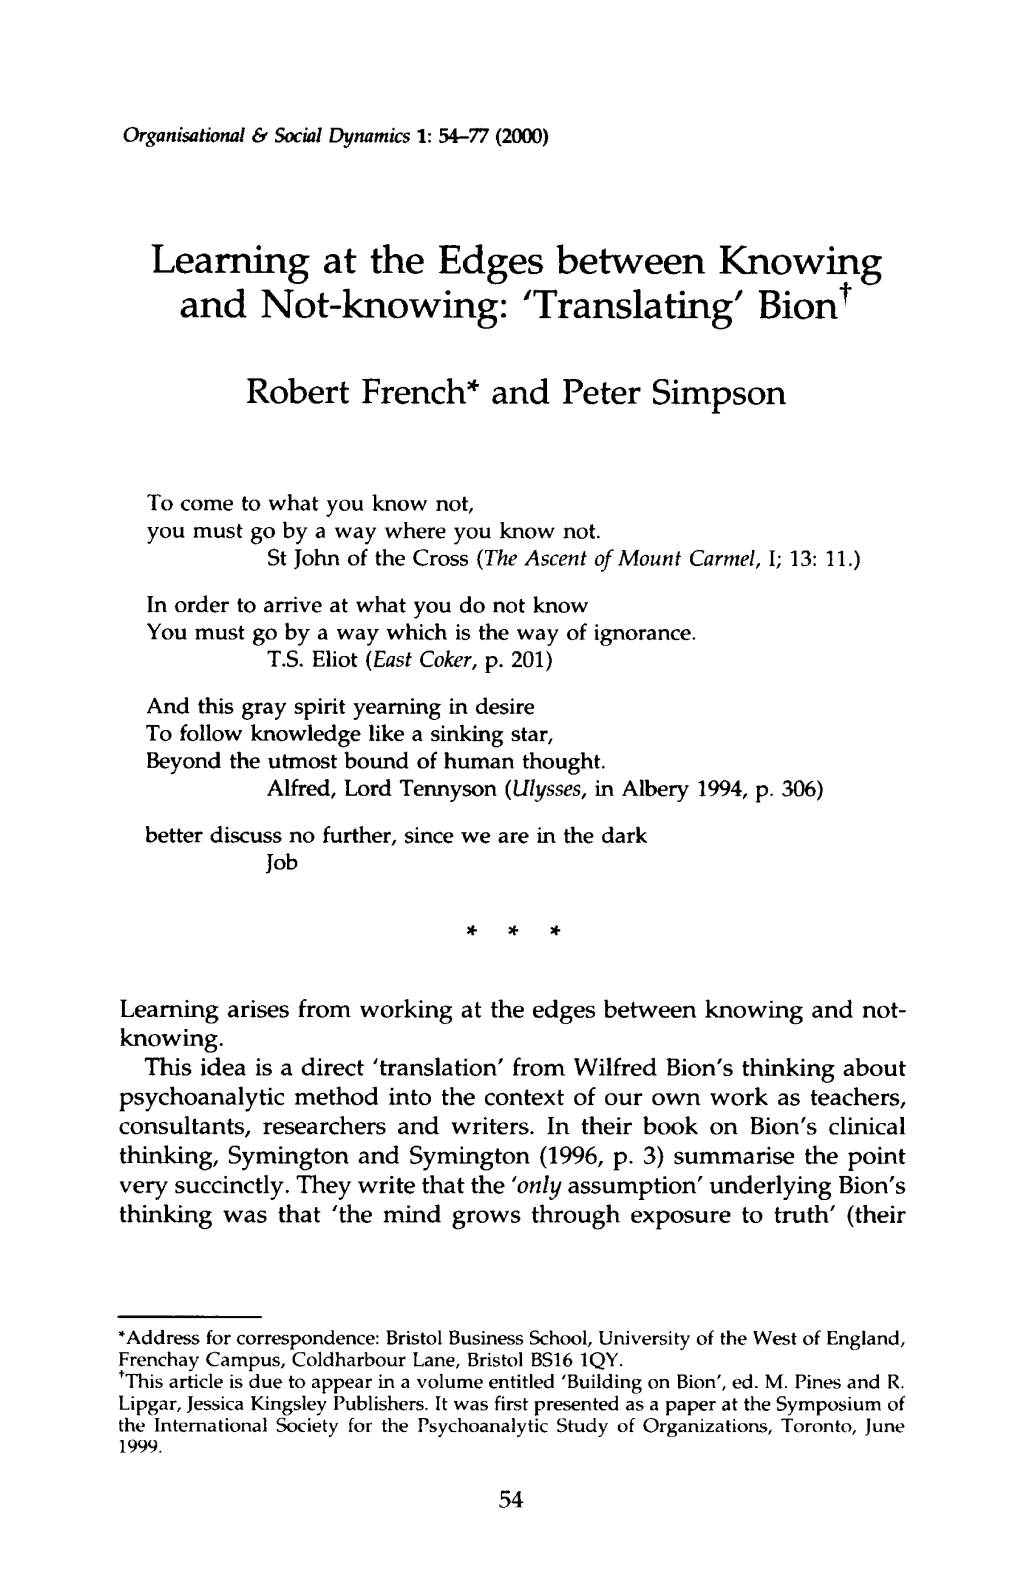 Learning at the Edges Between Knowing and Not-Knowing: Translating7 Bion1^